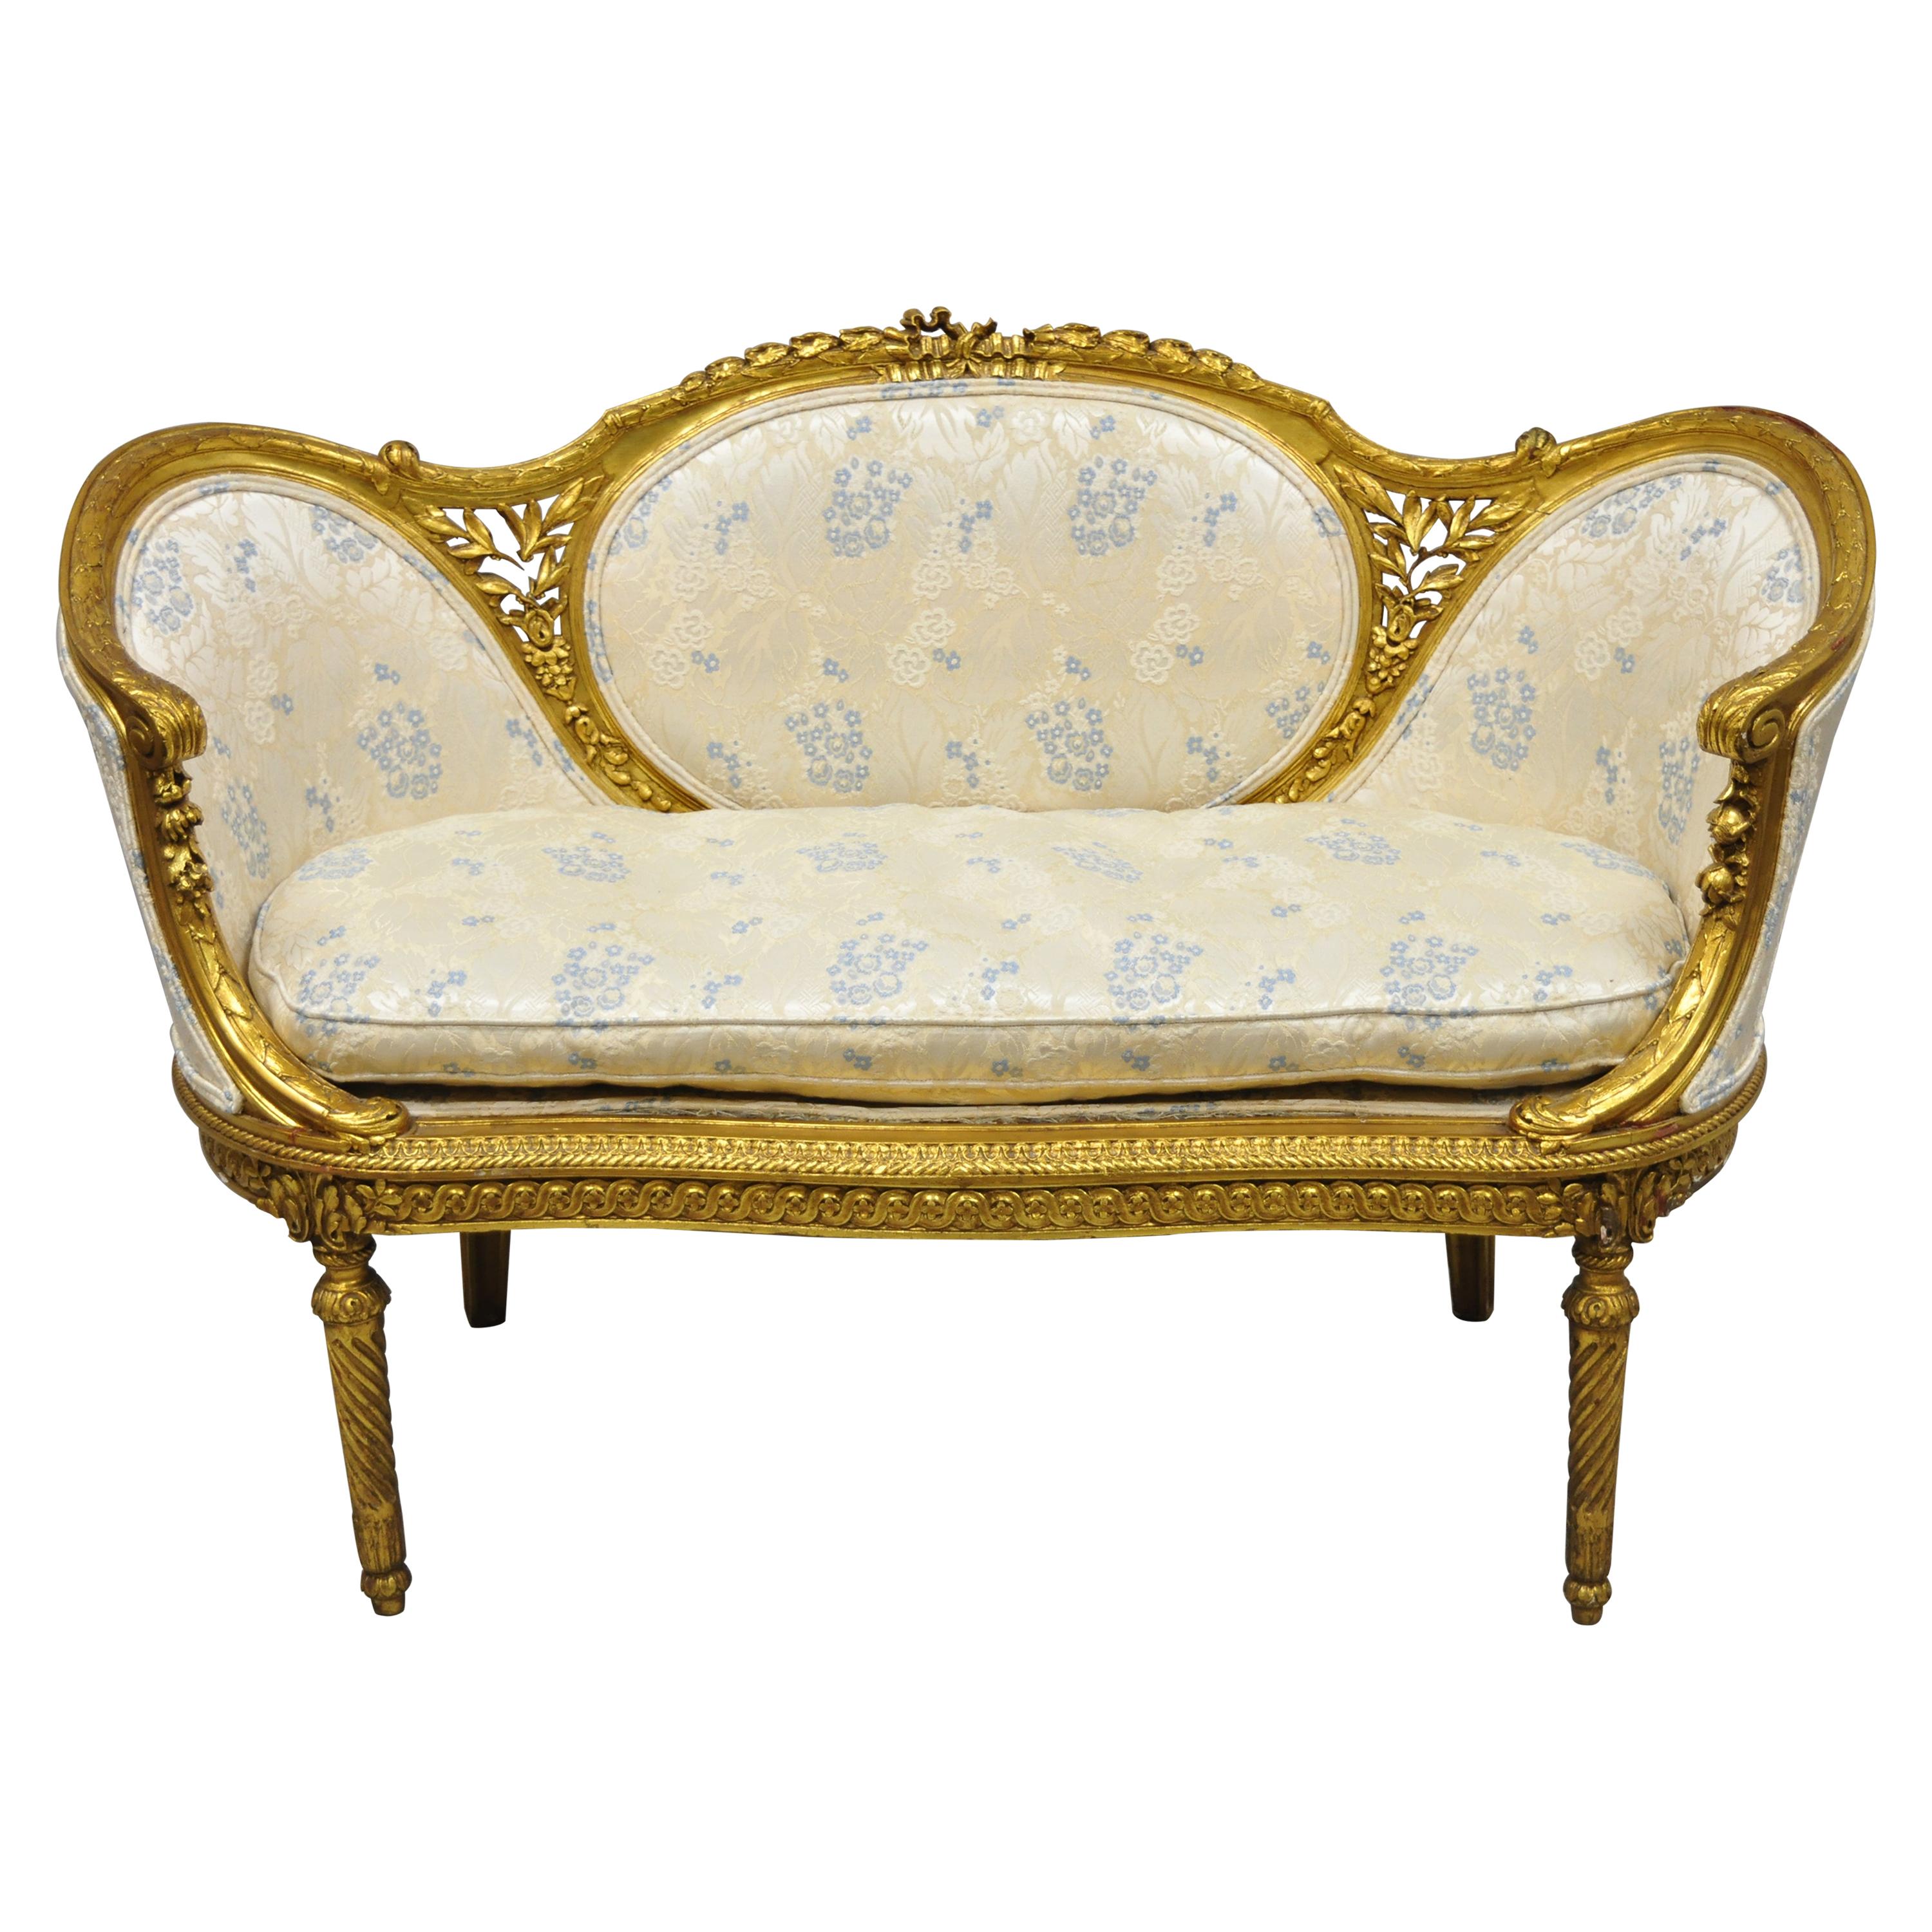 Antique French Louis XVI Style Victorian Gold Giltwood Petite Loveseat Settee